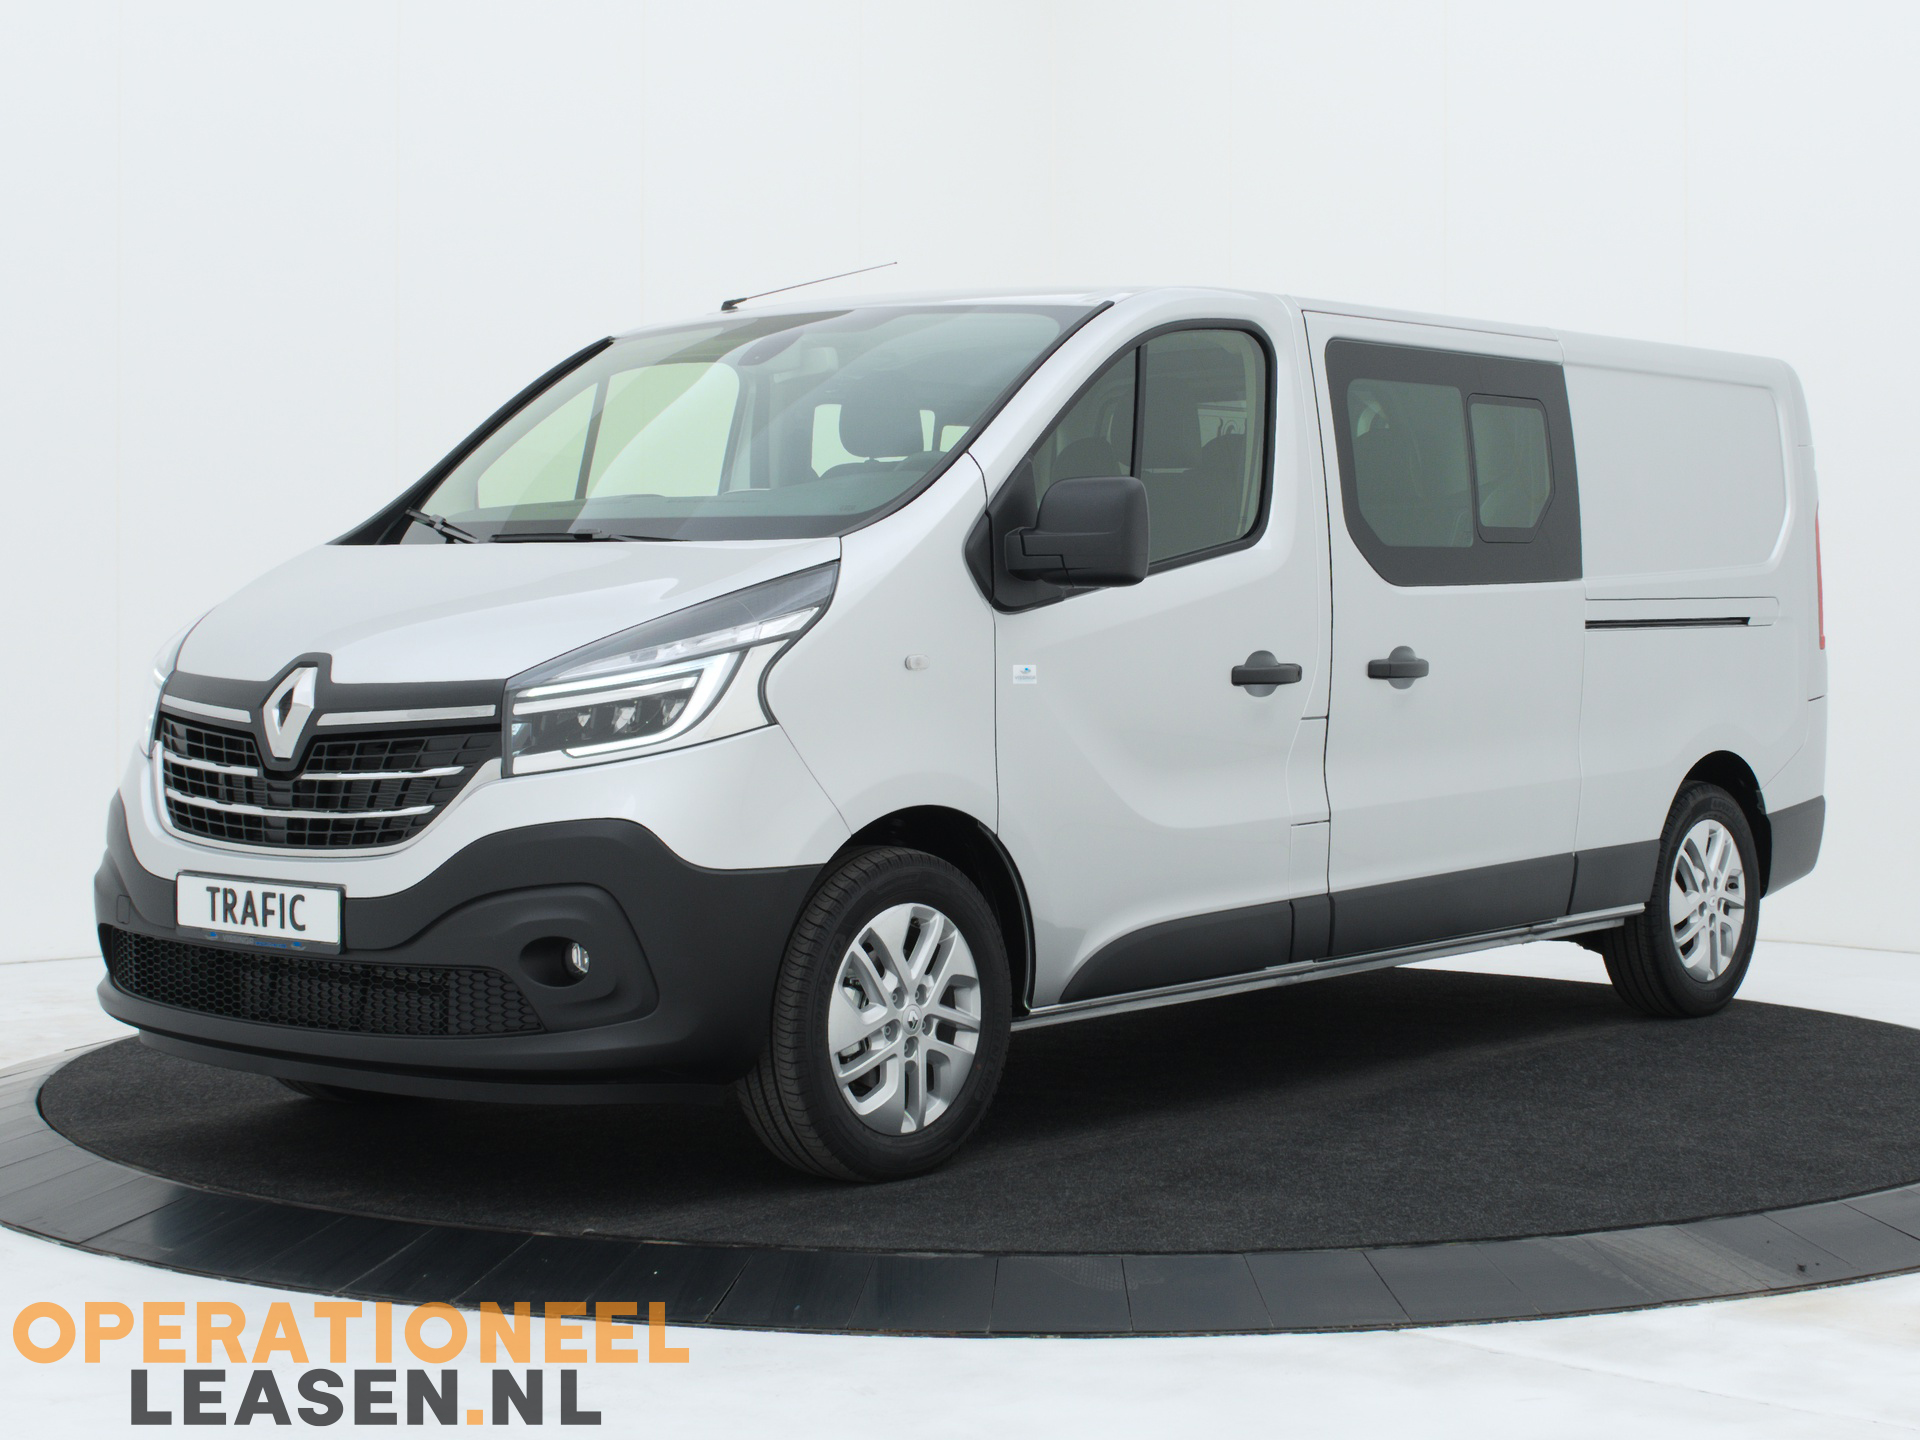 Operational lease Renault master traffic-1